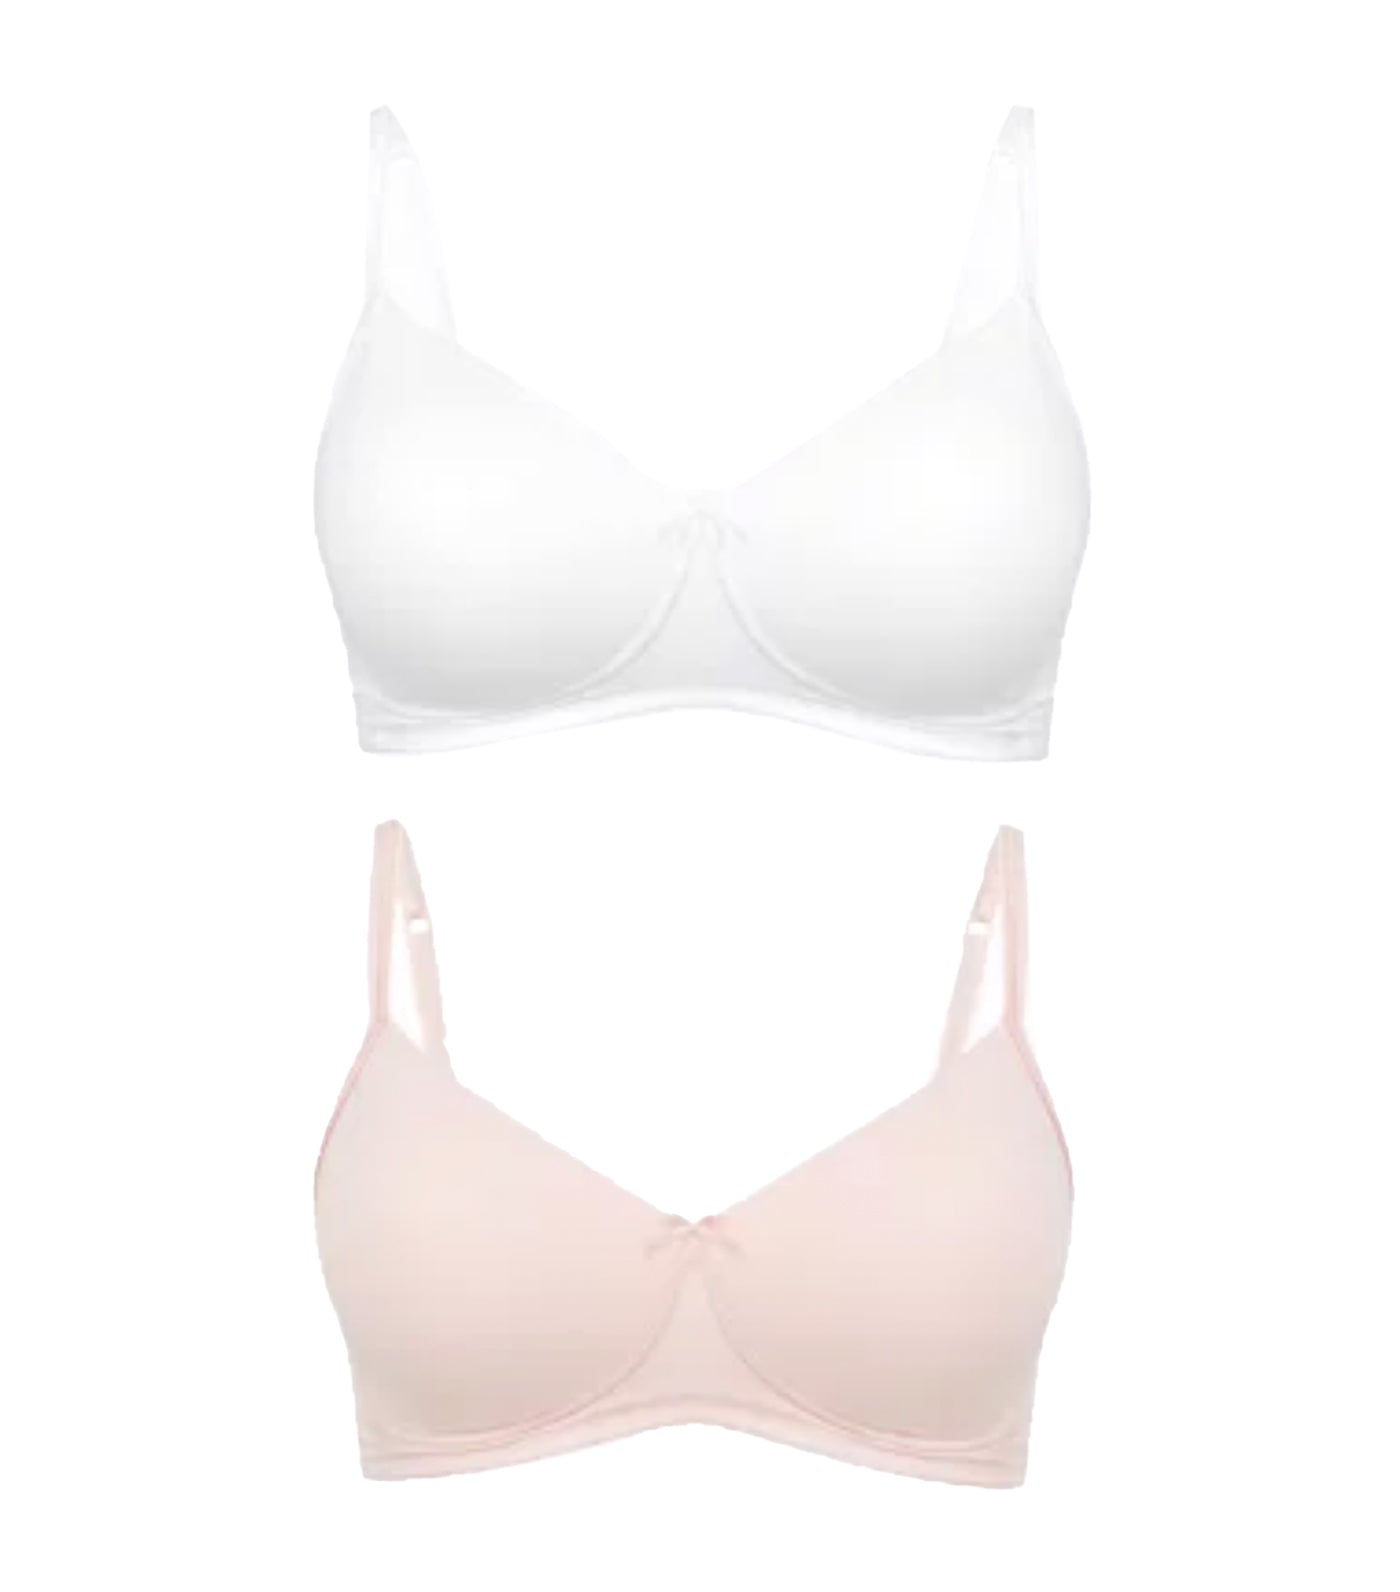 NEW! M&S Marks & Spencer 34A soft pink non-padded underwired full cup bra